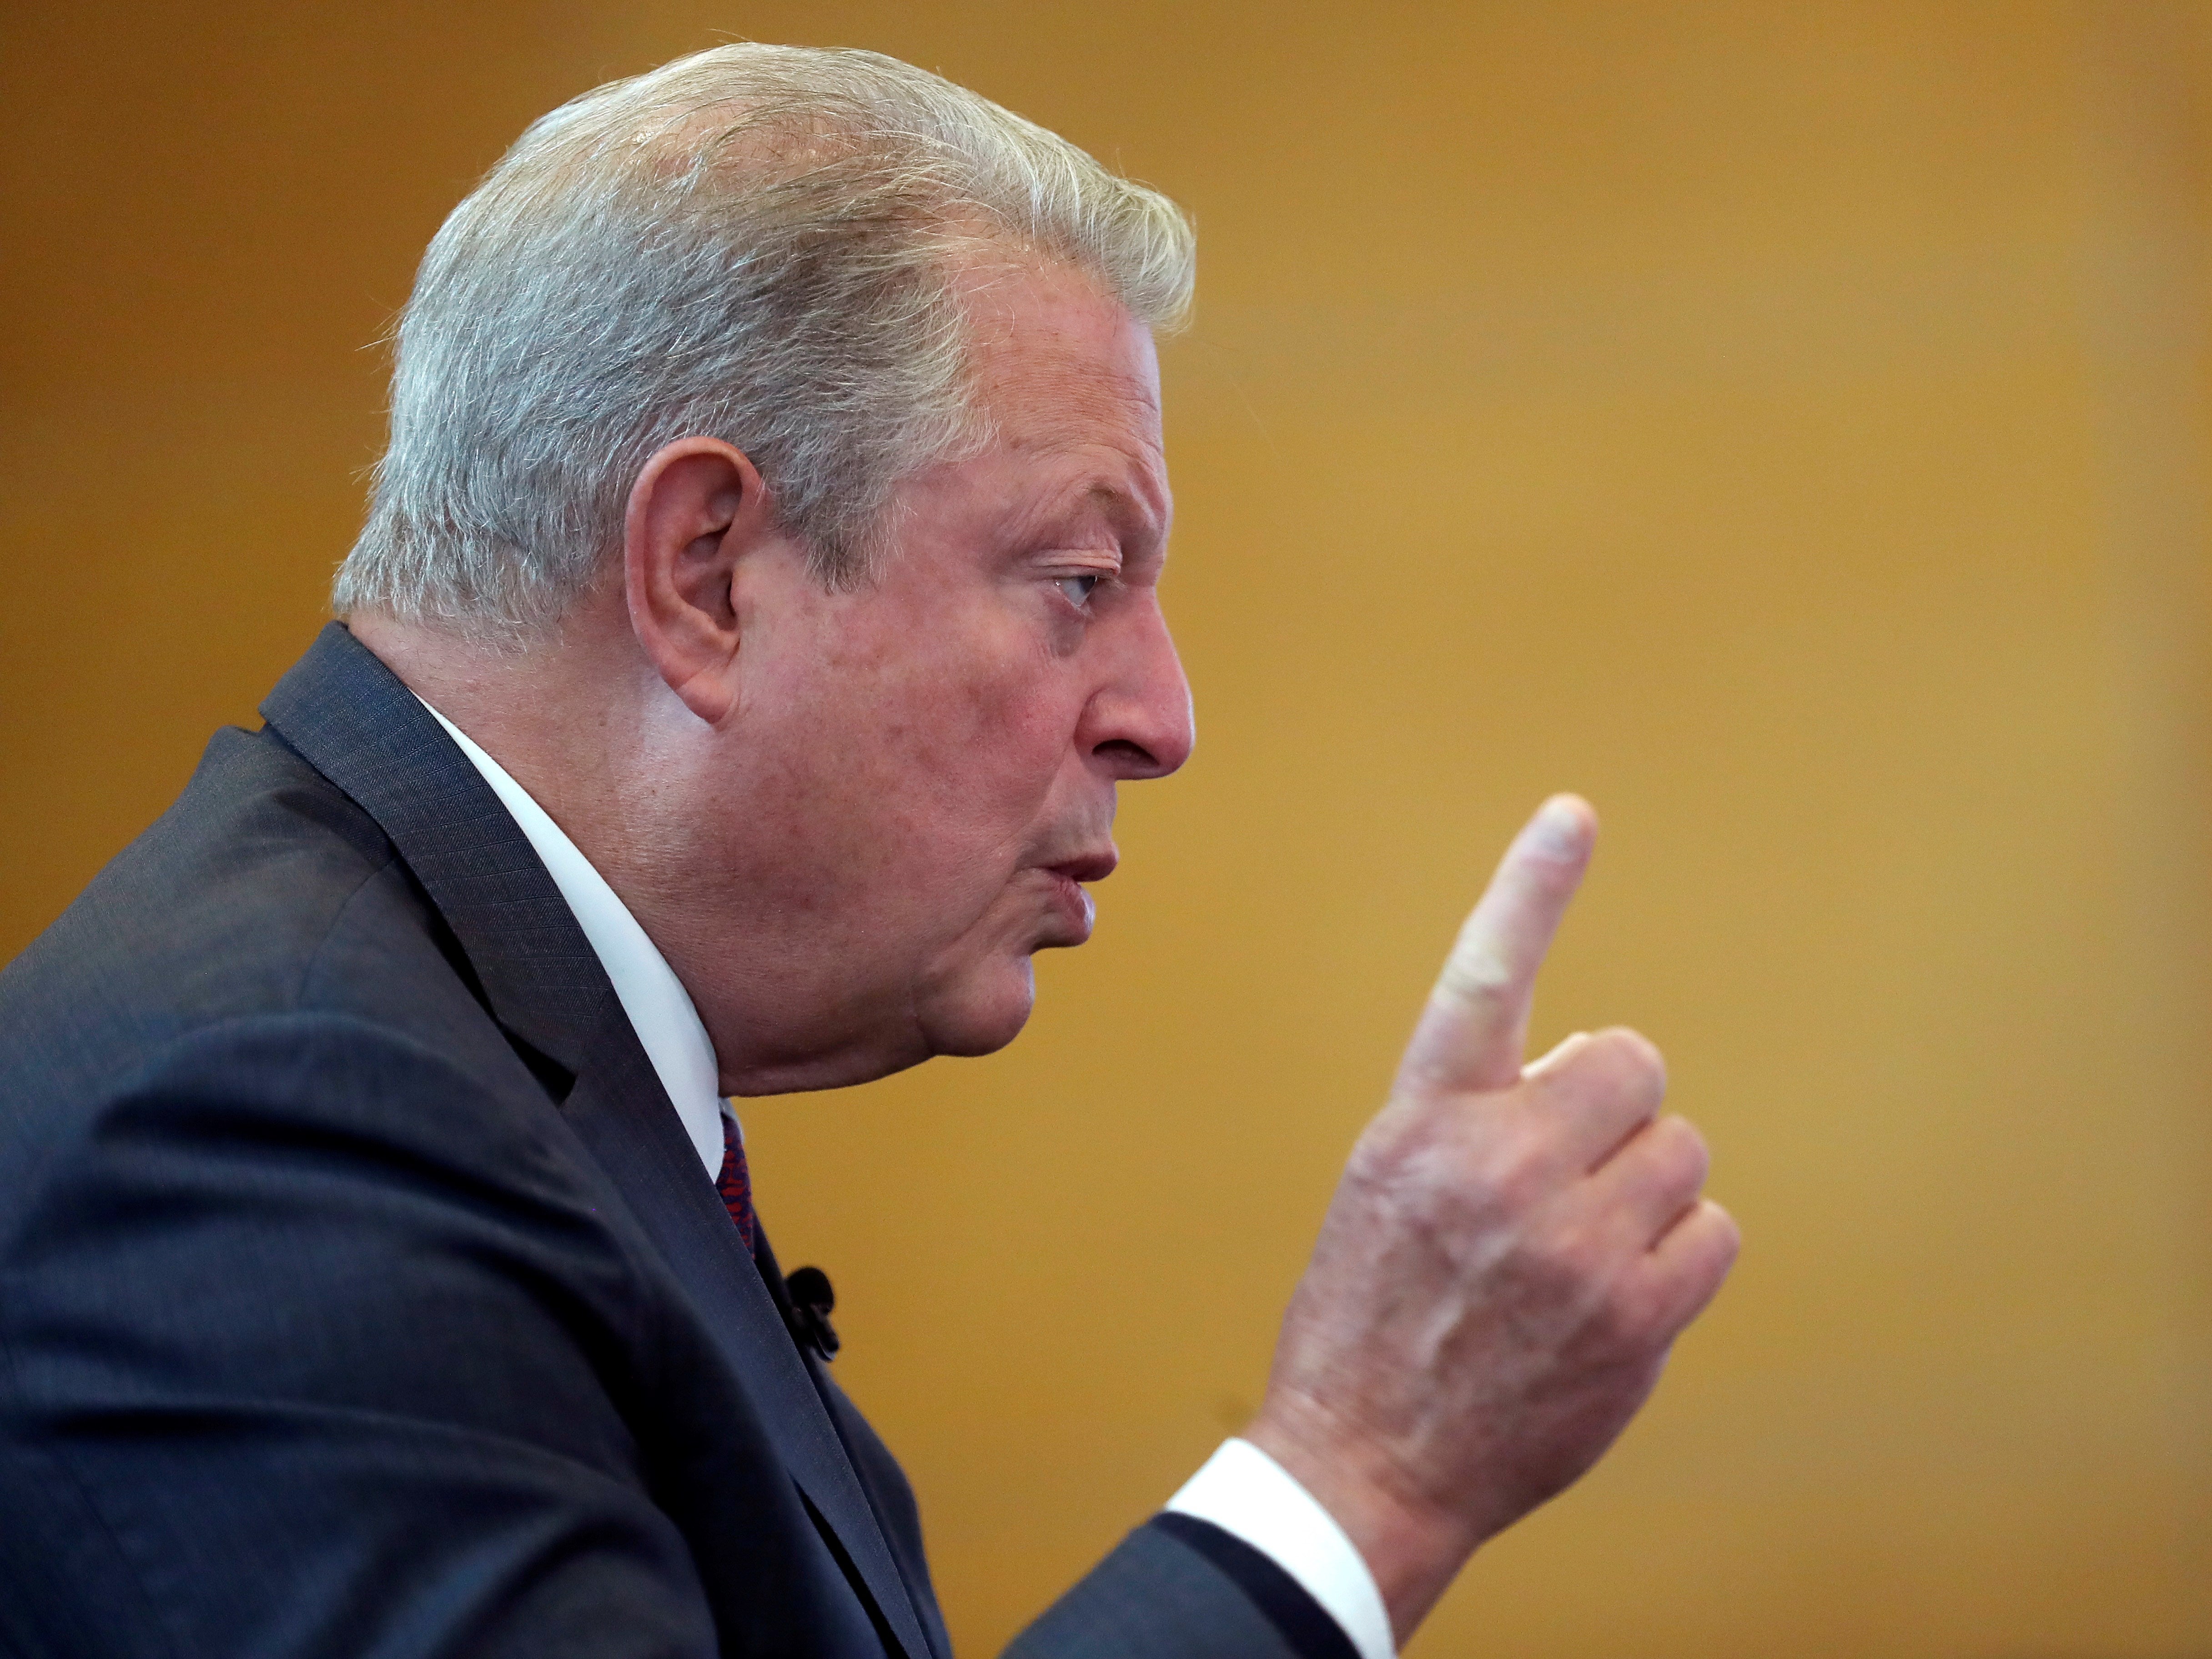 Al Gore said the data should be useful to leaders of the 100 countries that have little data on their most-polluting sectors